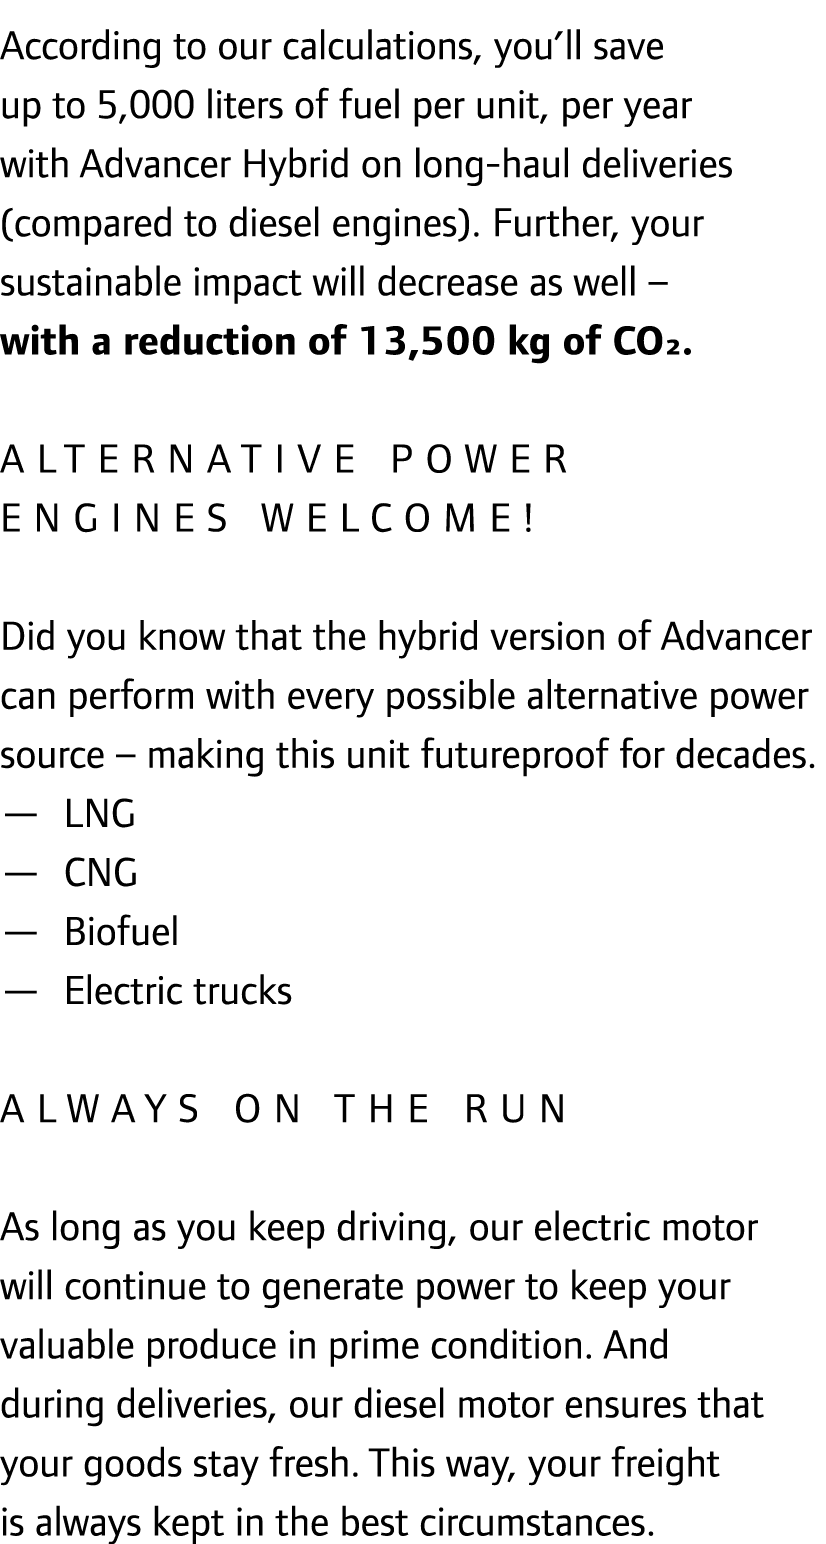 According to our calculations, you’ll save up to 5,000 liters of fuel per unit, per year with Advancer Hybrid on long...